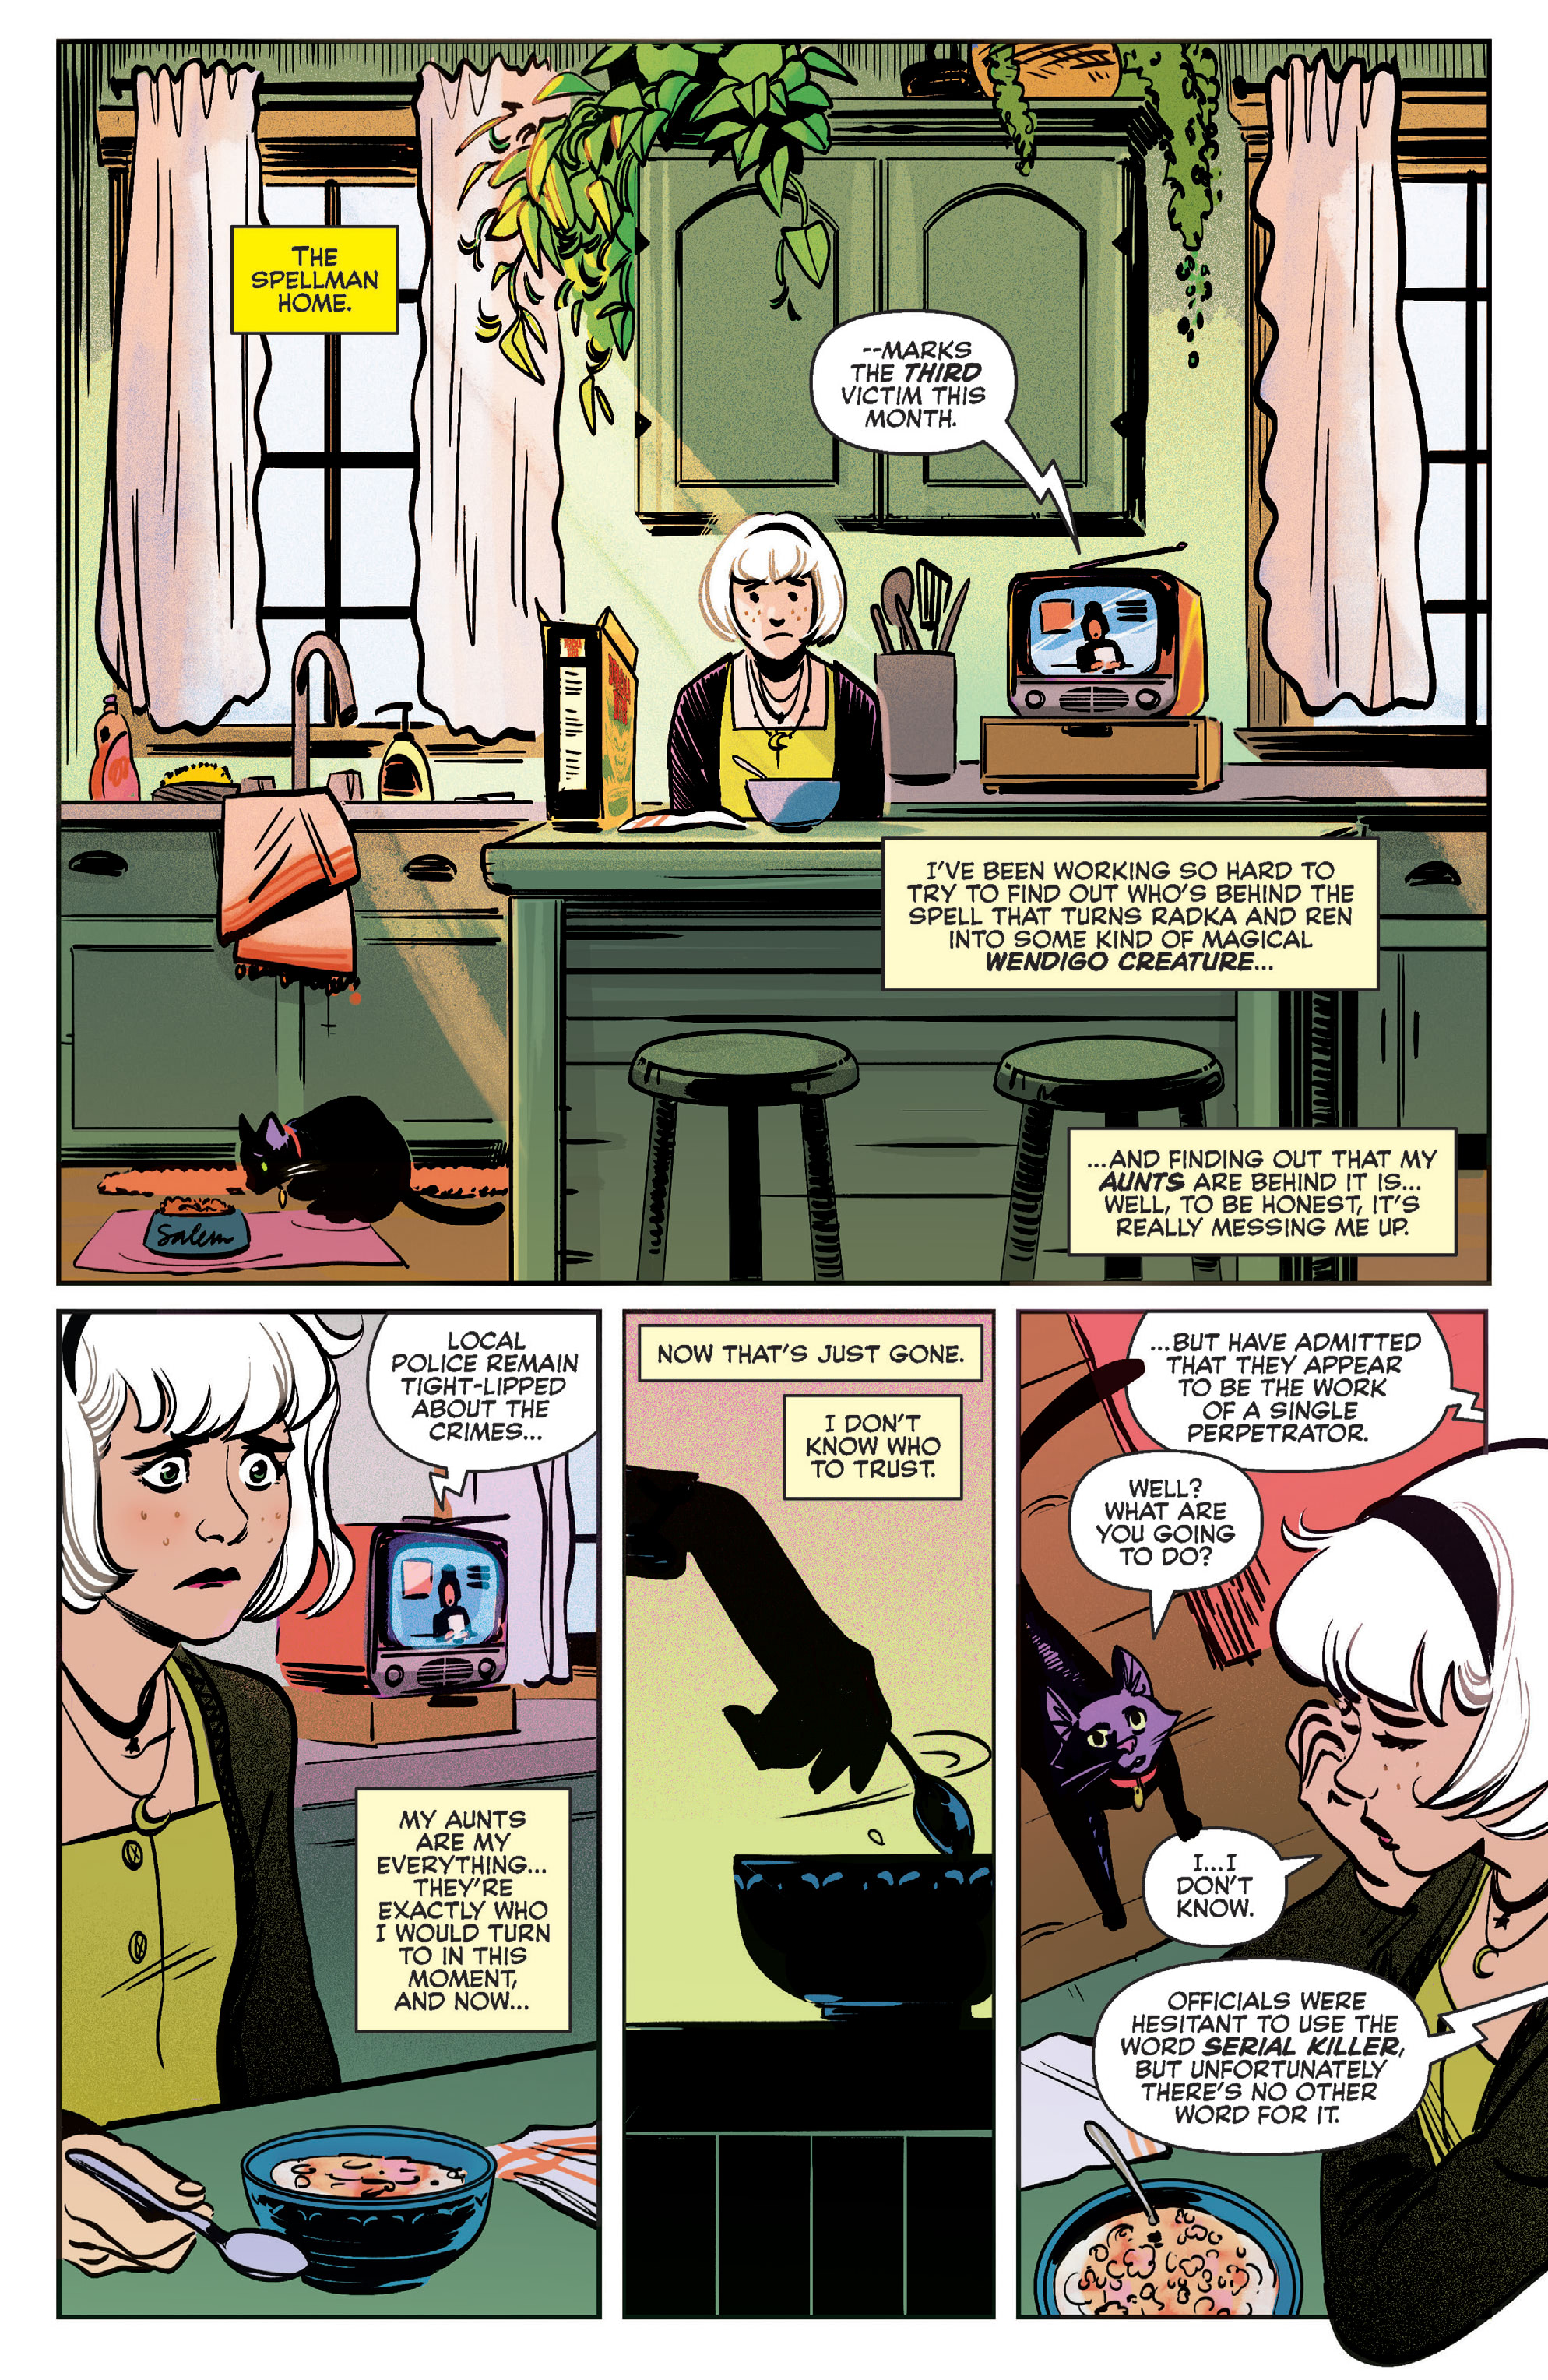 Sabrina: Something Wicked (2020-): Chapter 2 - Page 3